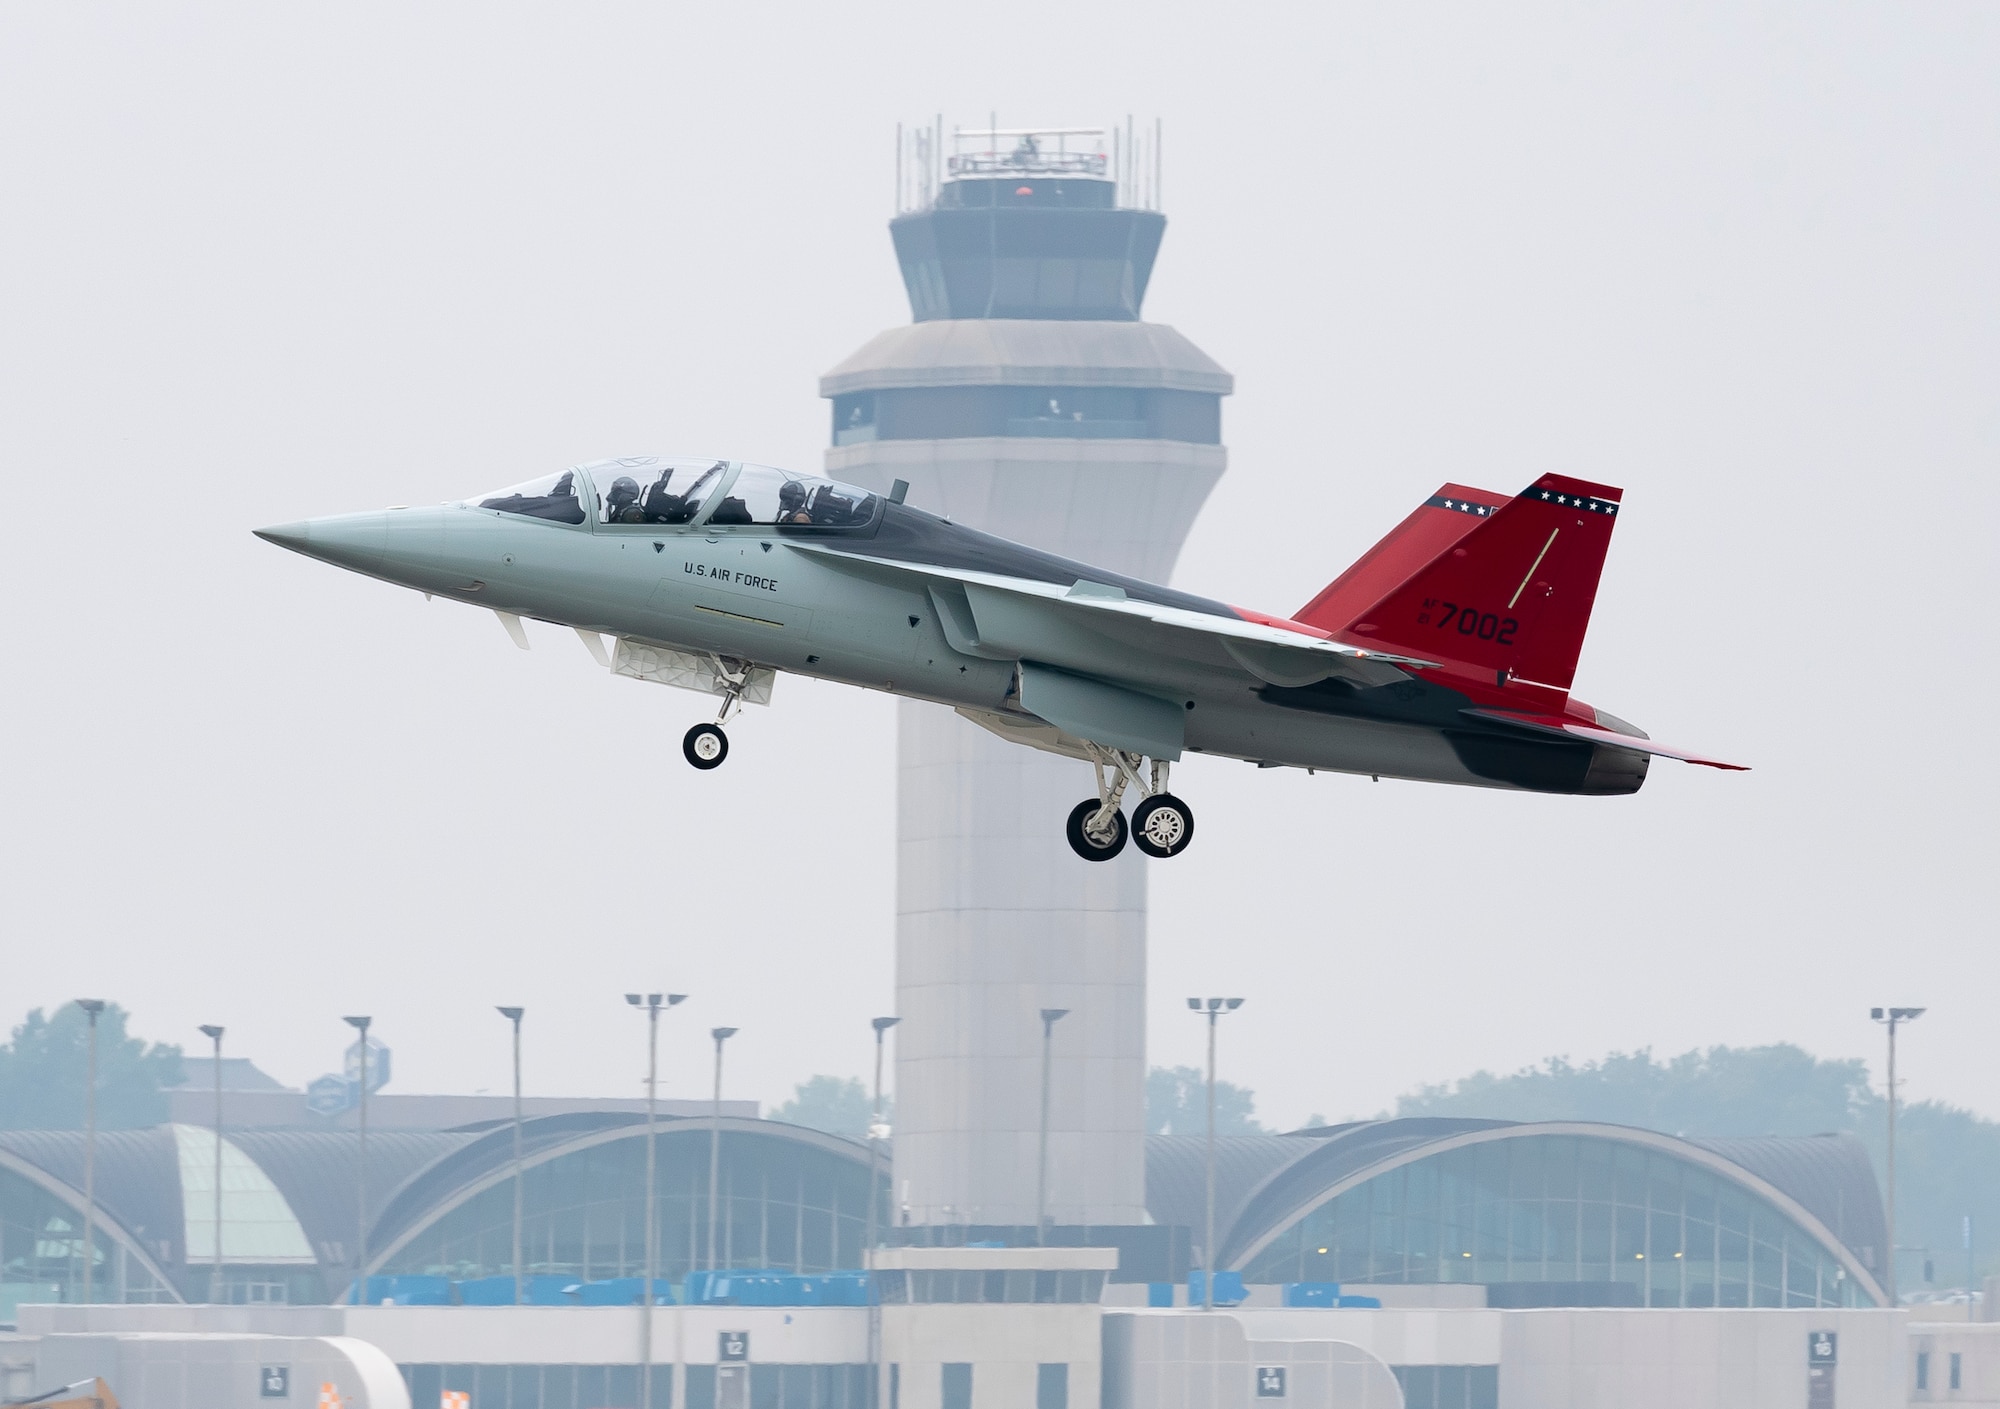 A T-7A Red Hawk, piloted by Maj. Bryce Turner, 416th Flight Test Squadron, takes off from St. Louis Lambert International Airport, St. Louis, Missouri, June 28. During the flight Turner became the first Air Force pilot to fly the T-7A. (Photo courtesy of Boeing)